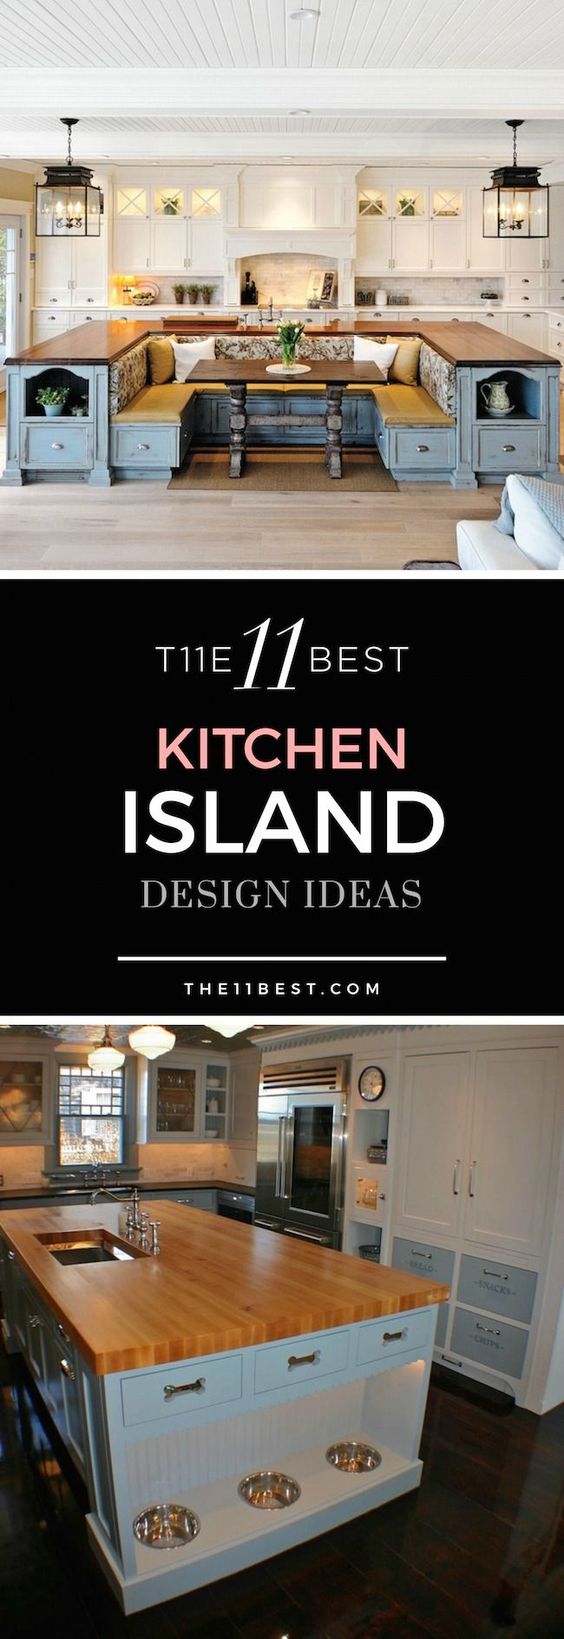 The 11 Best Kitchen Island Design Ideas for your home